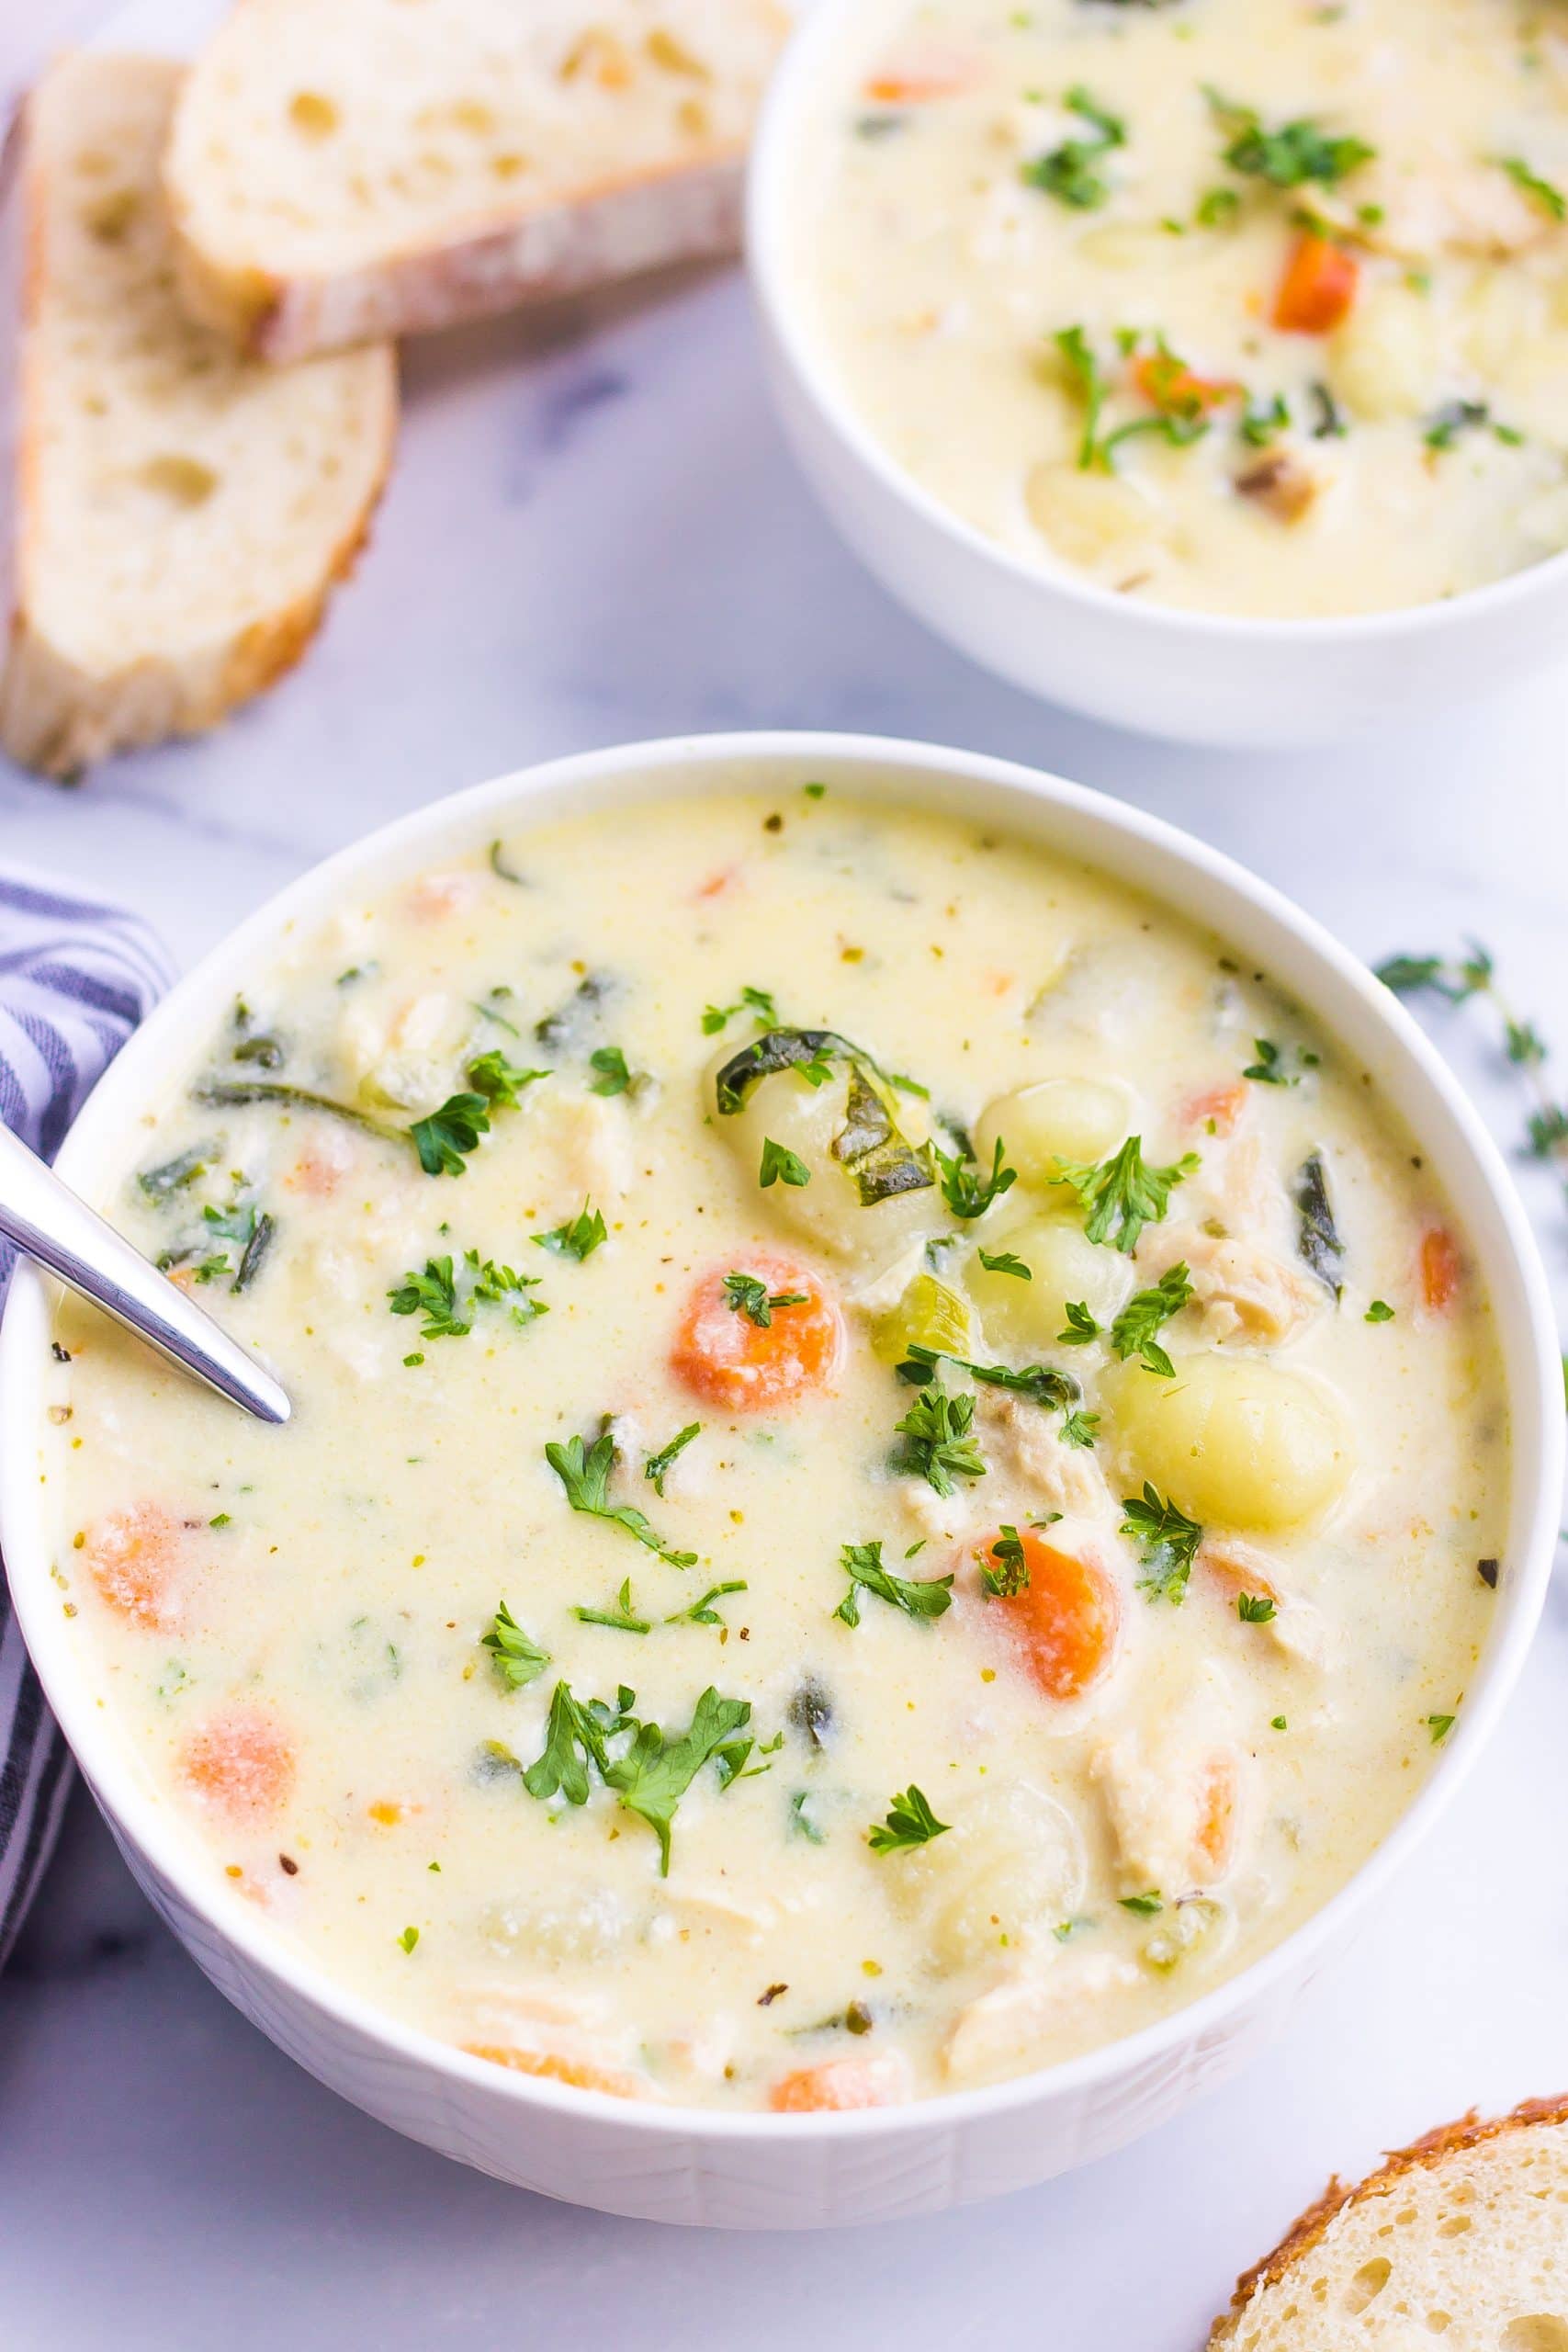 two bowls of gnocchi soup with chicken, carrots, celery, herbs